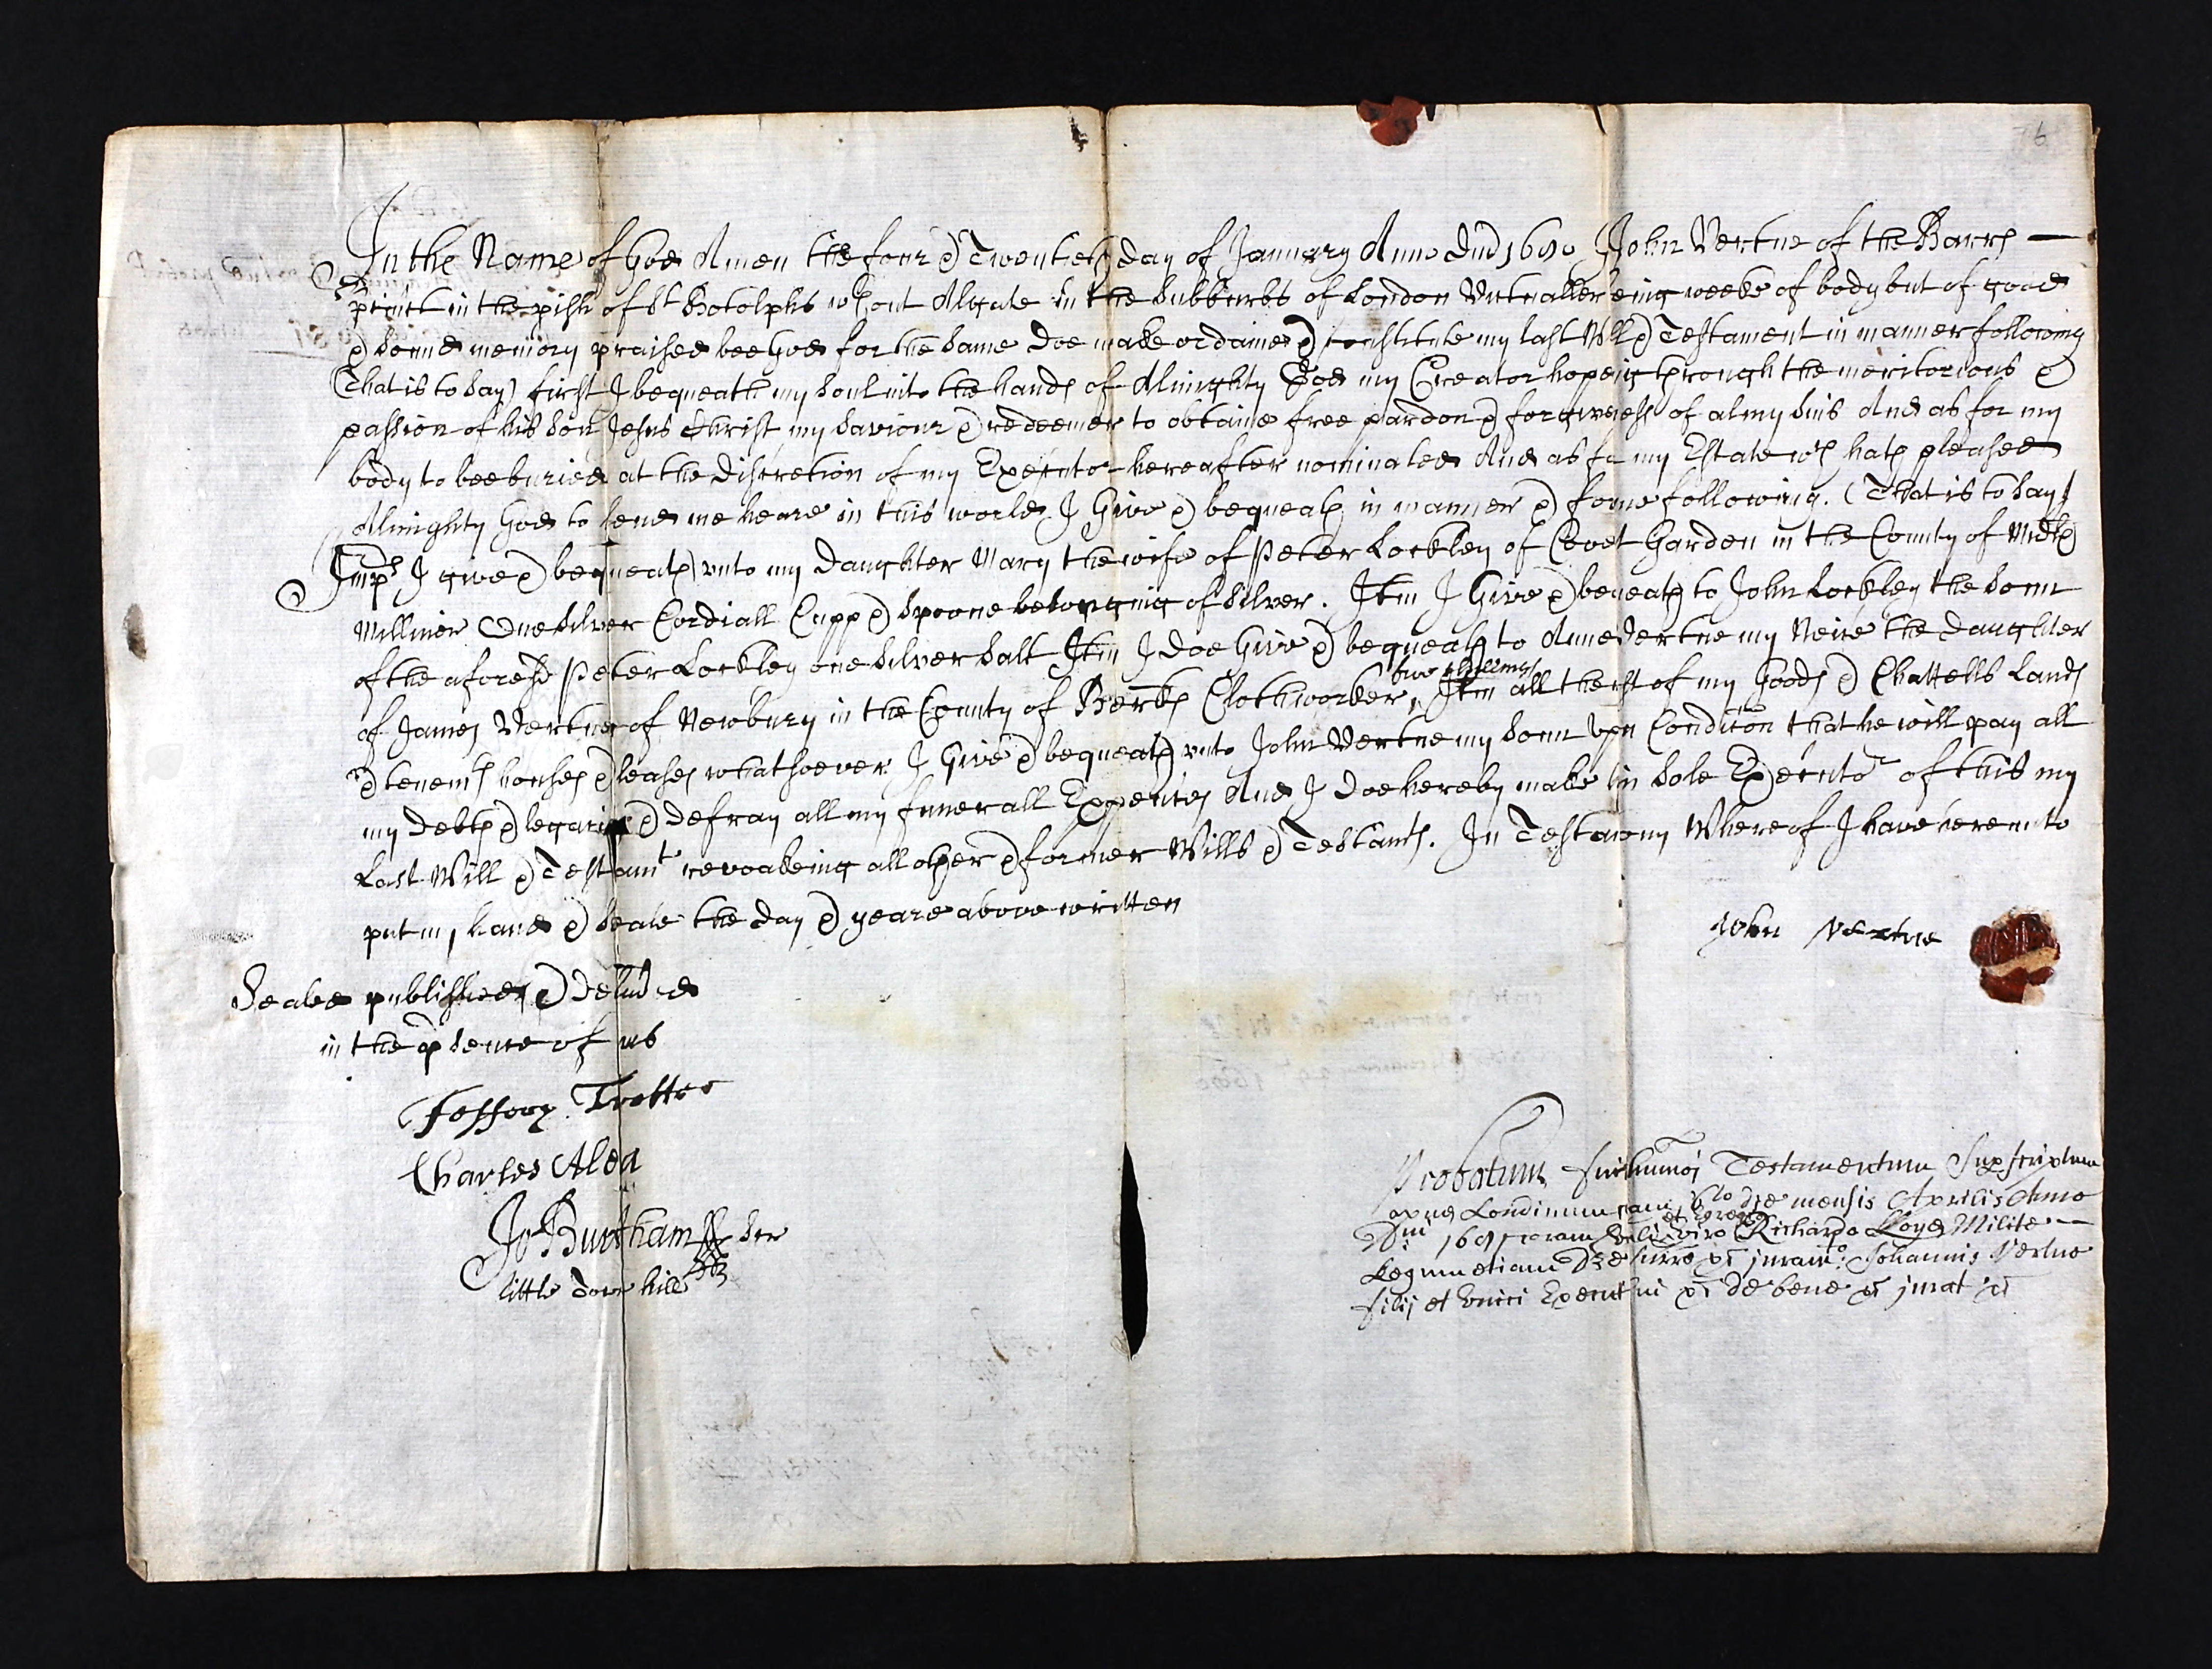 The will of John Vertue of St Botolph without Aldgate in 1681